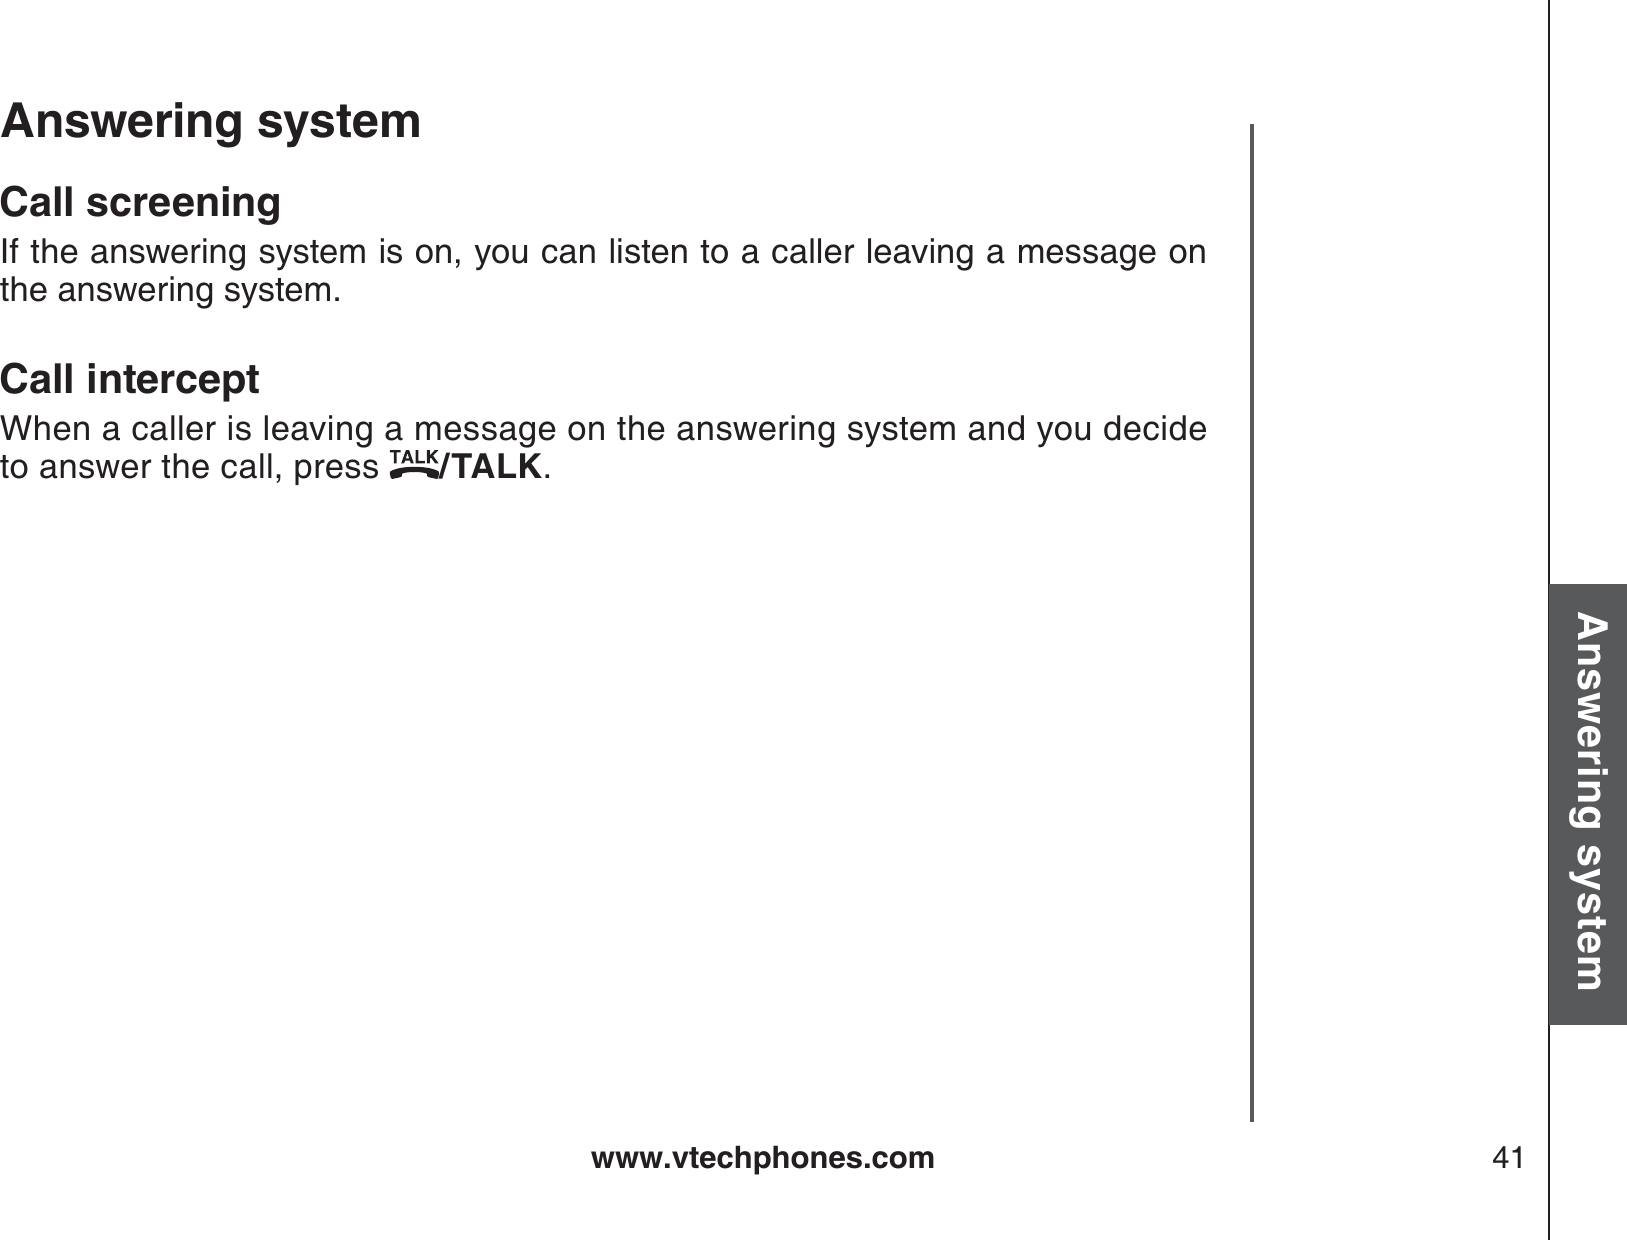 www.vtechphones.com 41Basic operationAnswering systemAnswering system Call screeningIf the answering system is on, you can listen to a caller leaving a message on the answering system.Call interceptWhen a caller is leaving a message on the answering system and you decide to answer the call, press  /TALK.